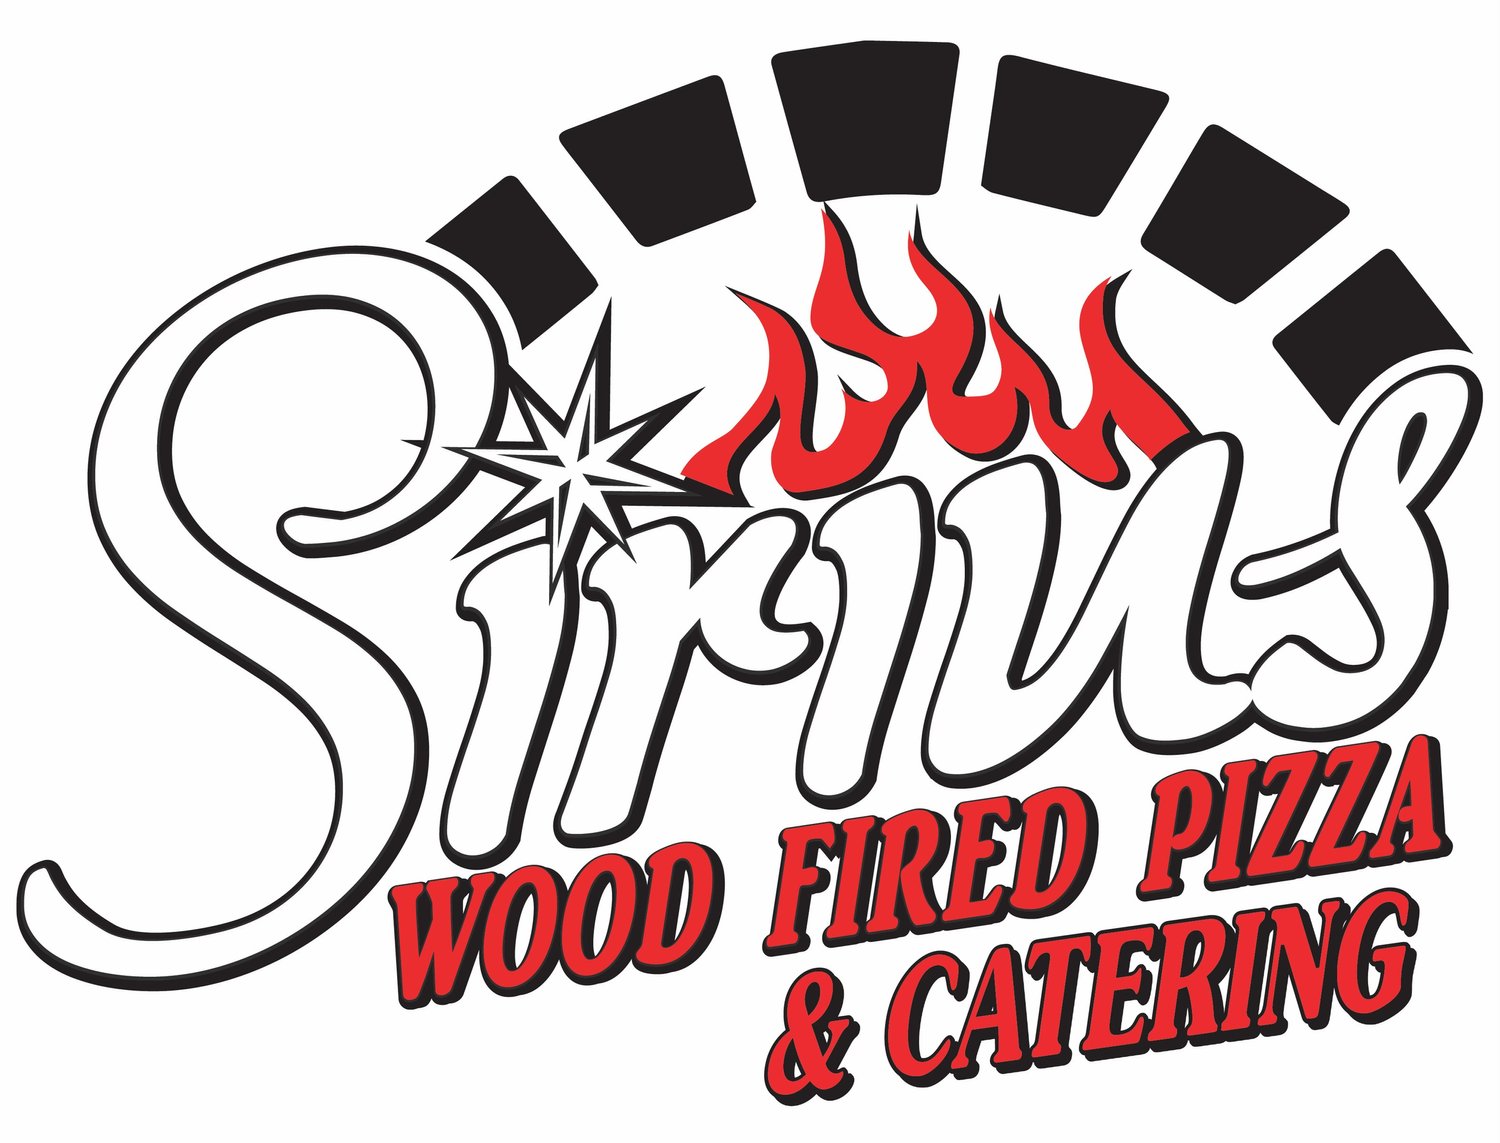 Sirius Wood Fired PIzza